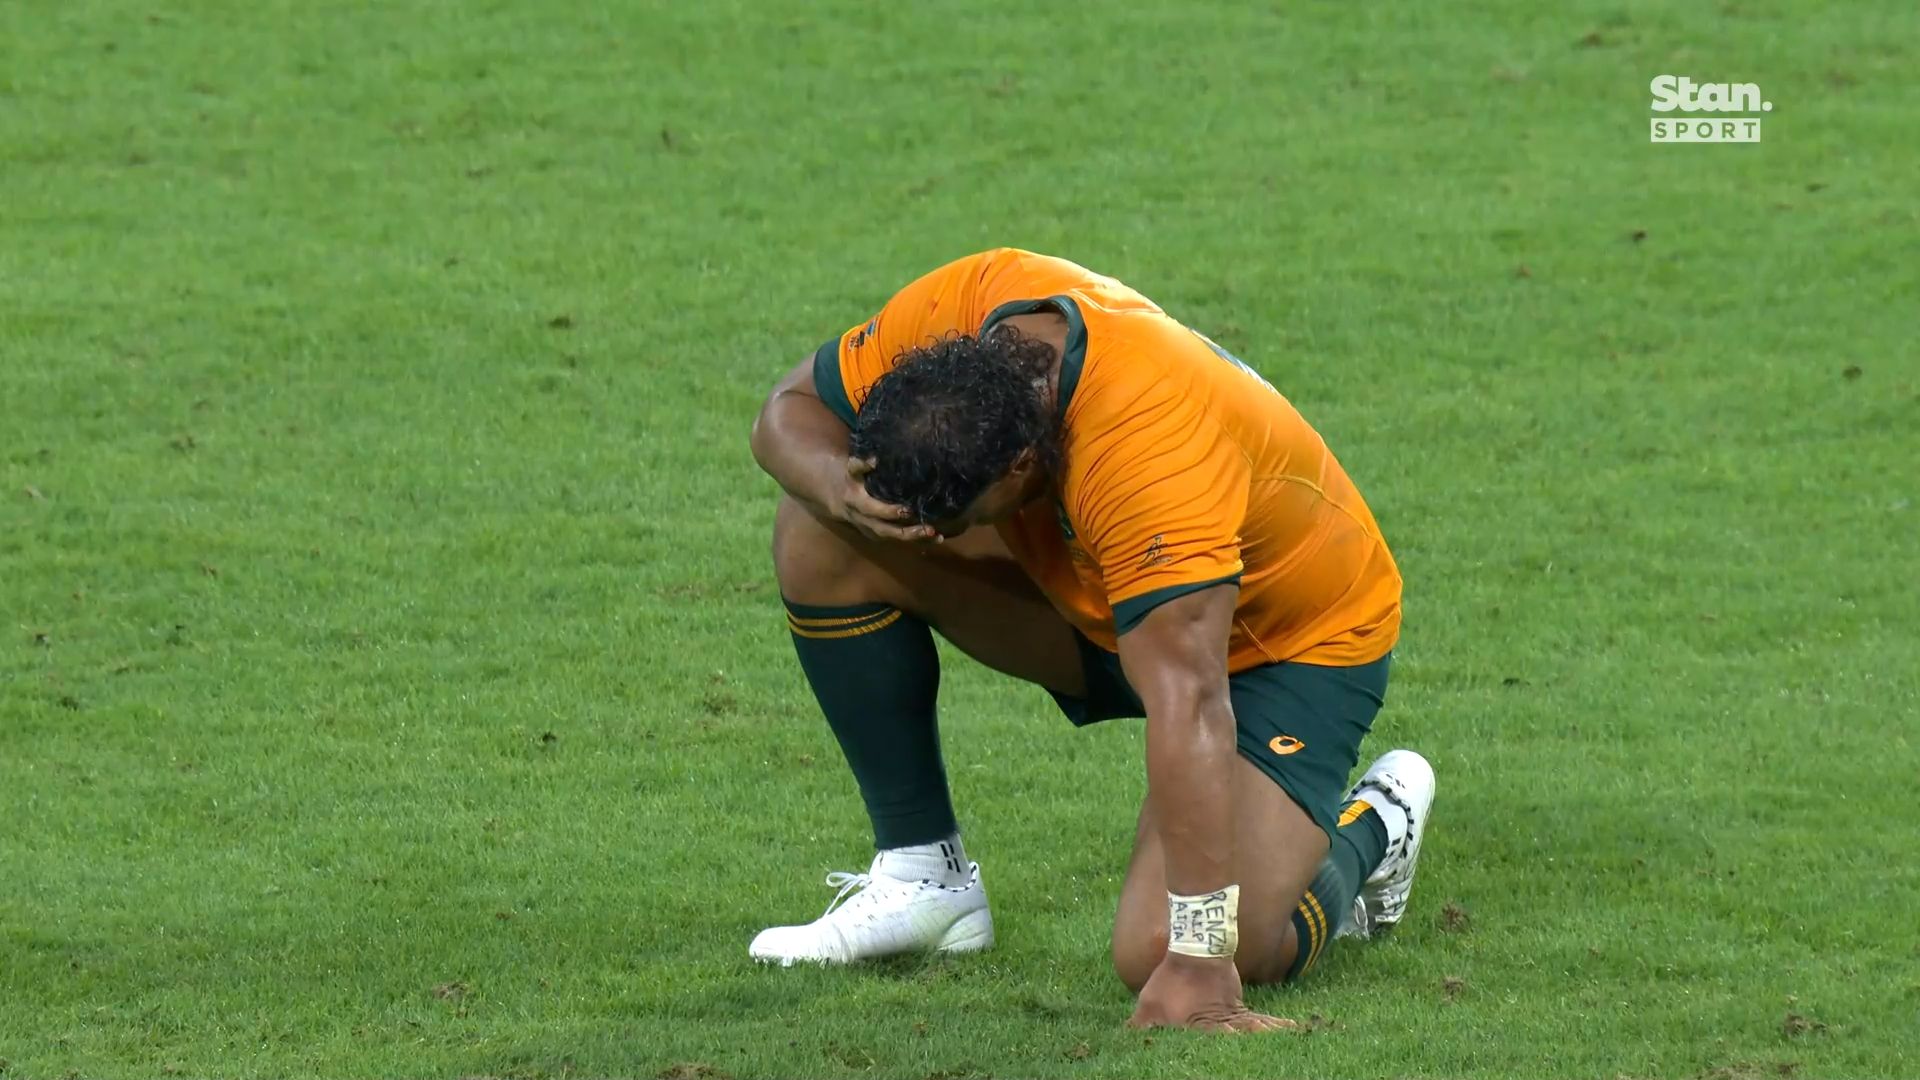 Australia's 'devastating' day that didn't need to happen as broken Wallabies players face the music in France